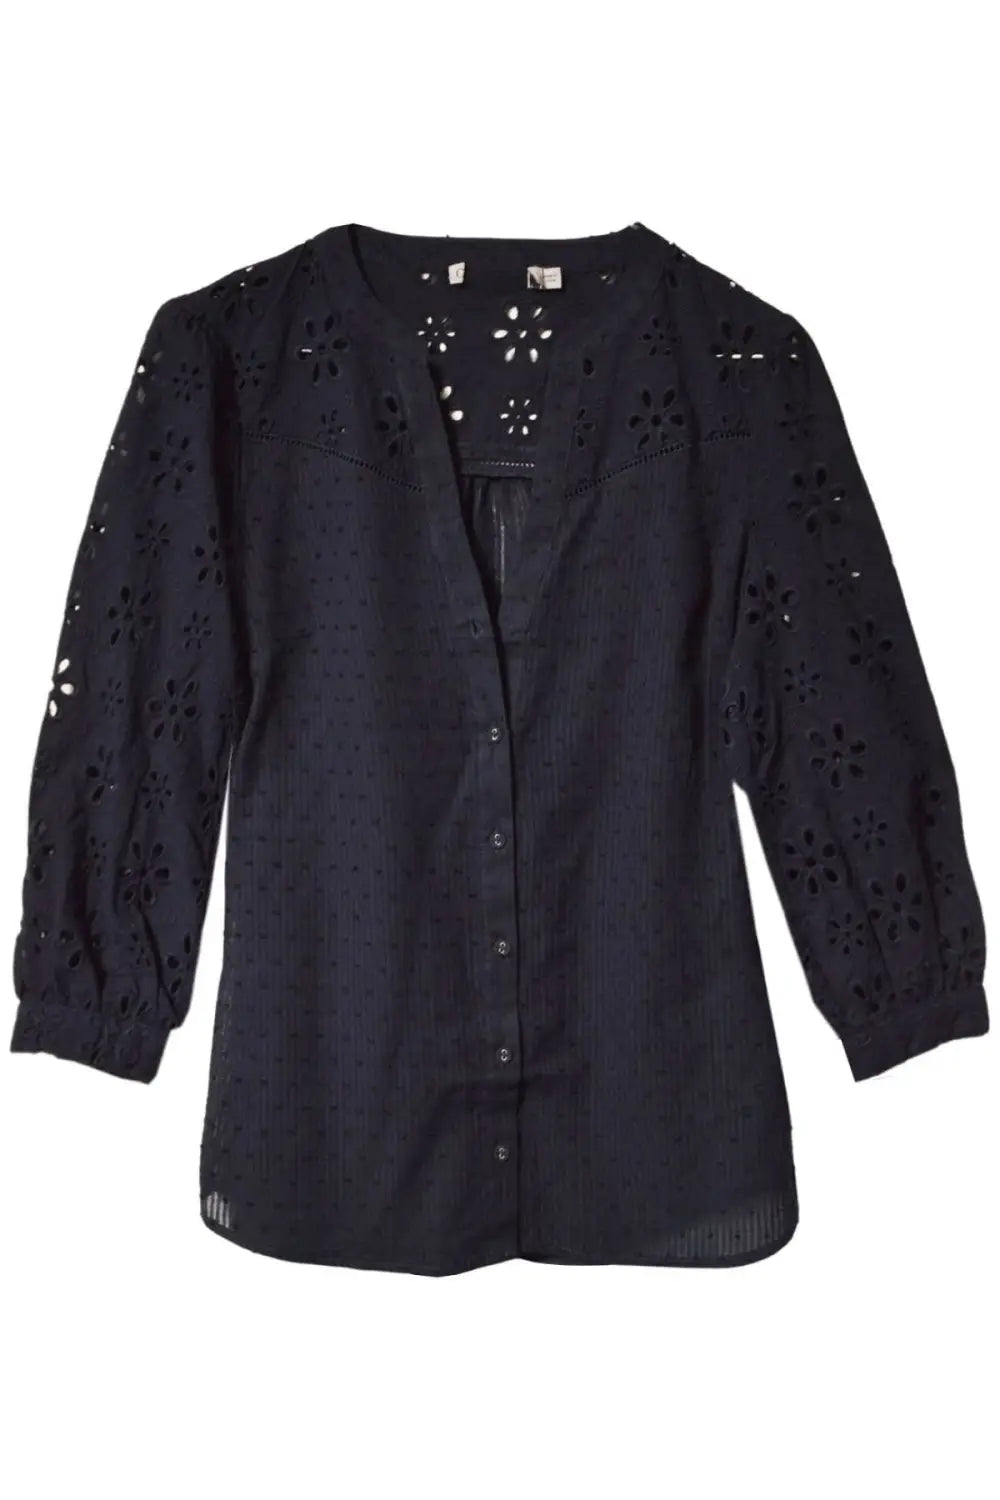 Oasis Broderie Dobby Blouse